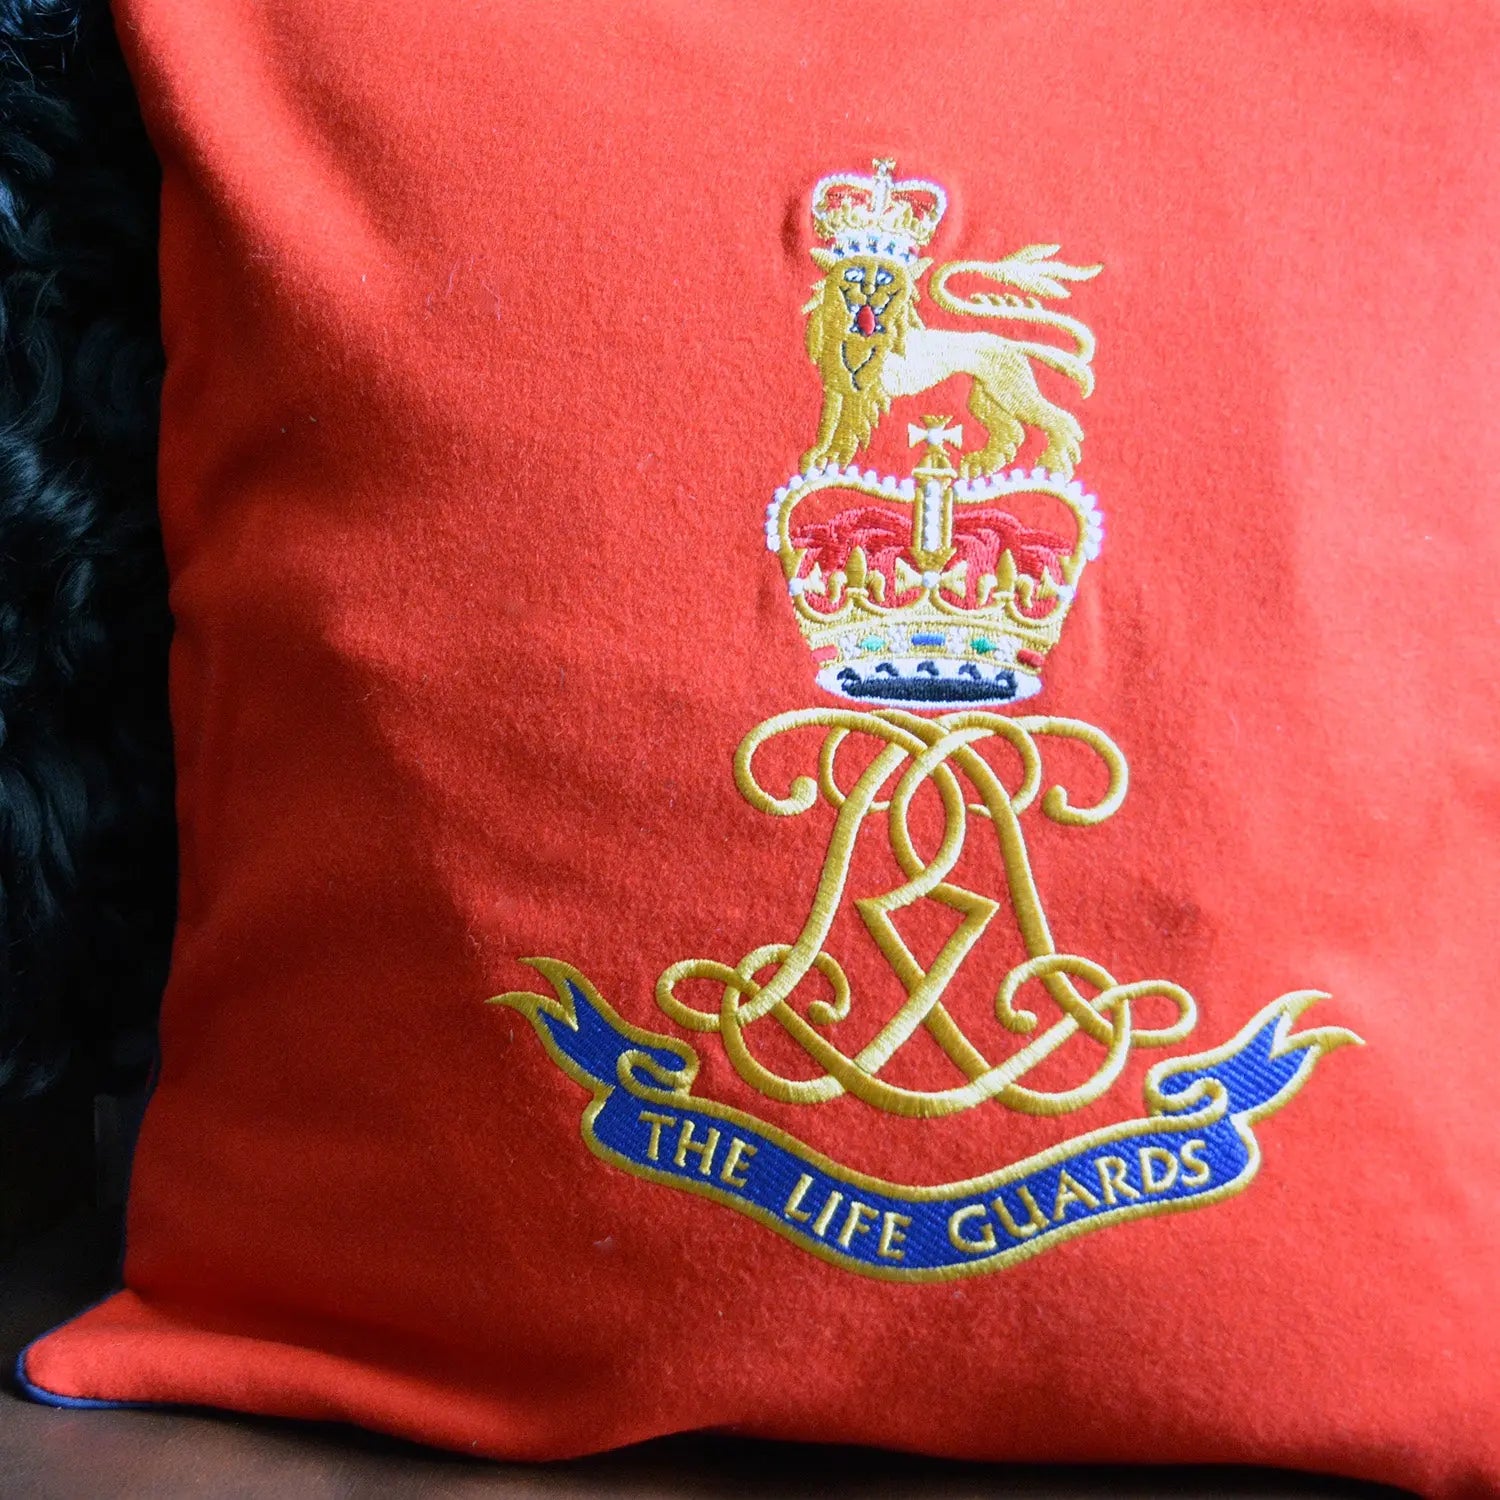 Lifeguards Insignia Embroidered Cushion Cover wyedean